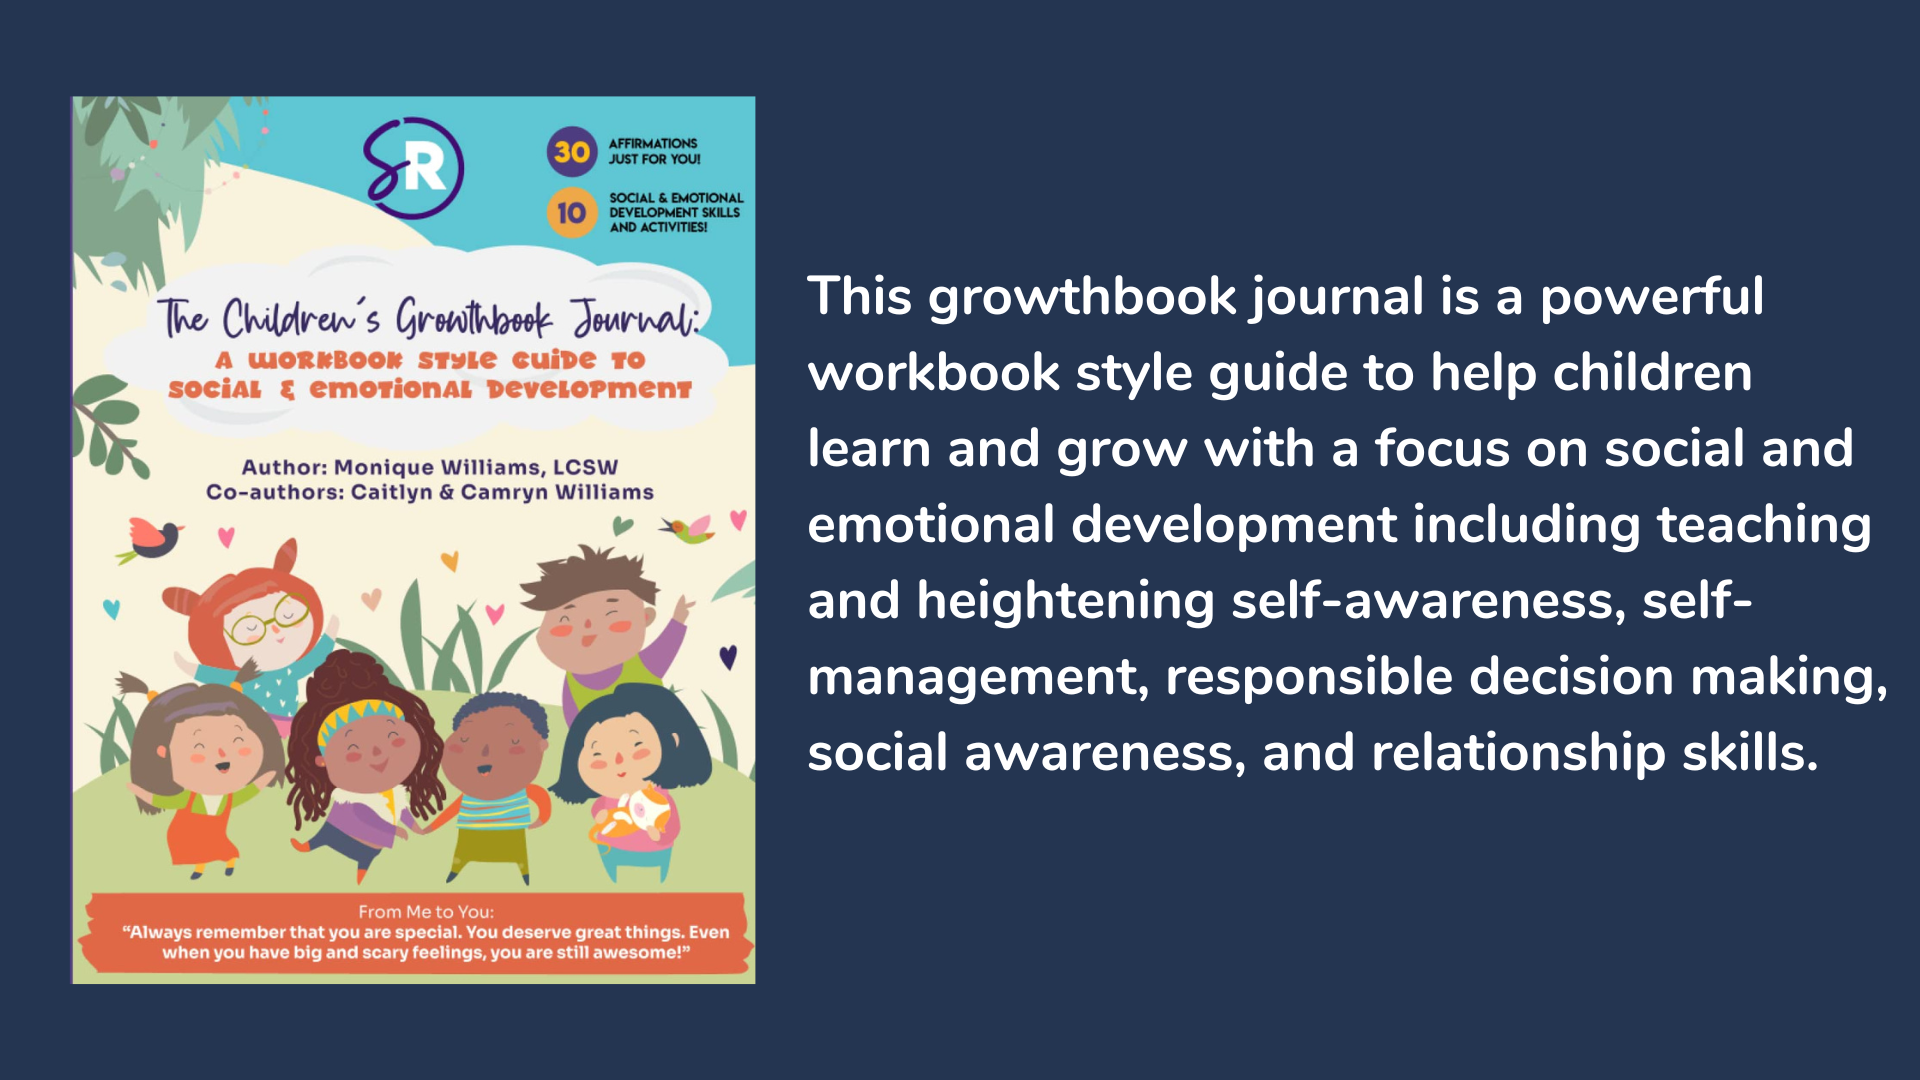 The Children's Growthbook Journal, book cover and description